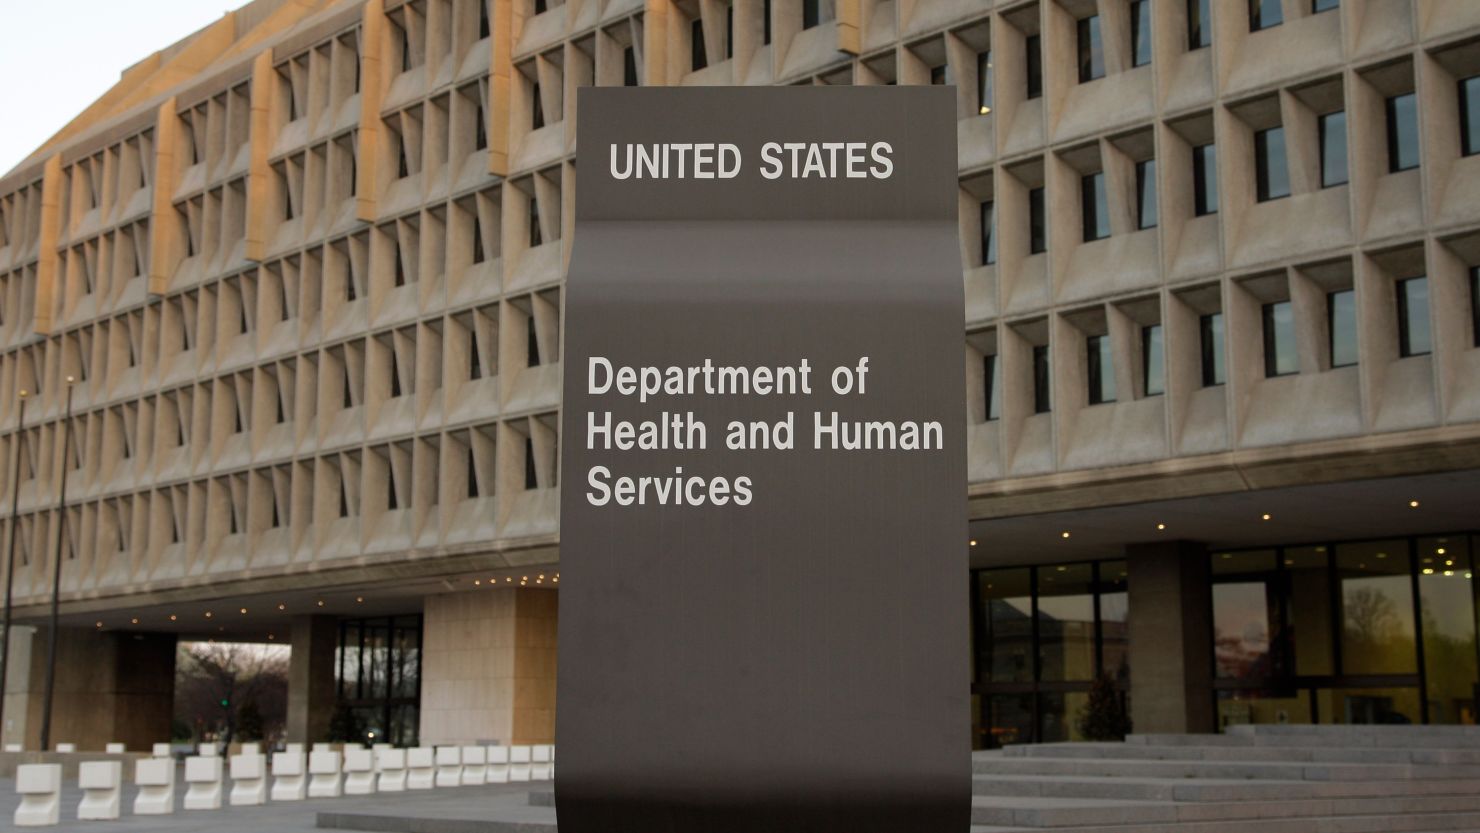 The US Department of Health and Human Services building in Washington, DC.